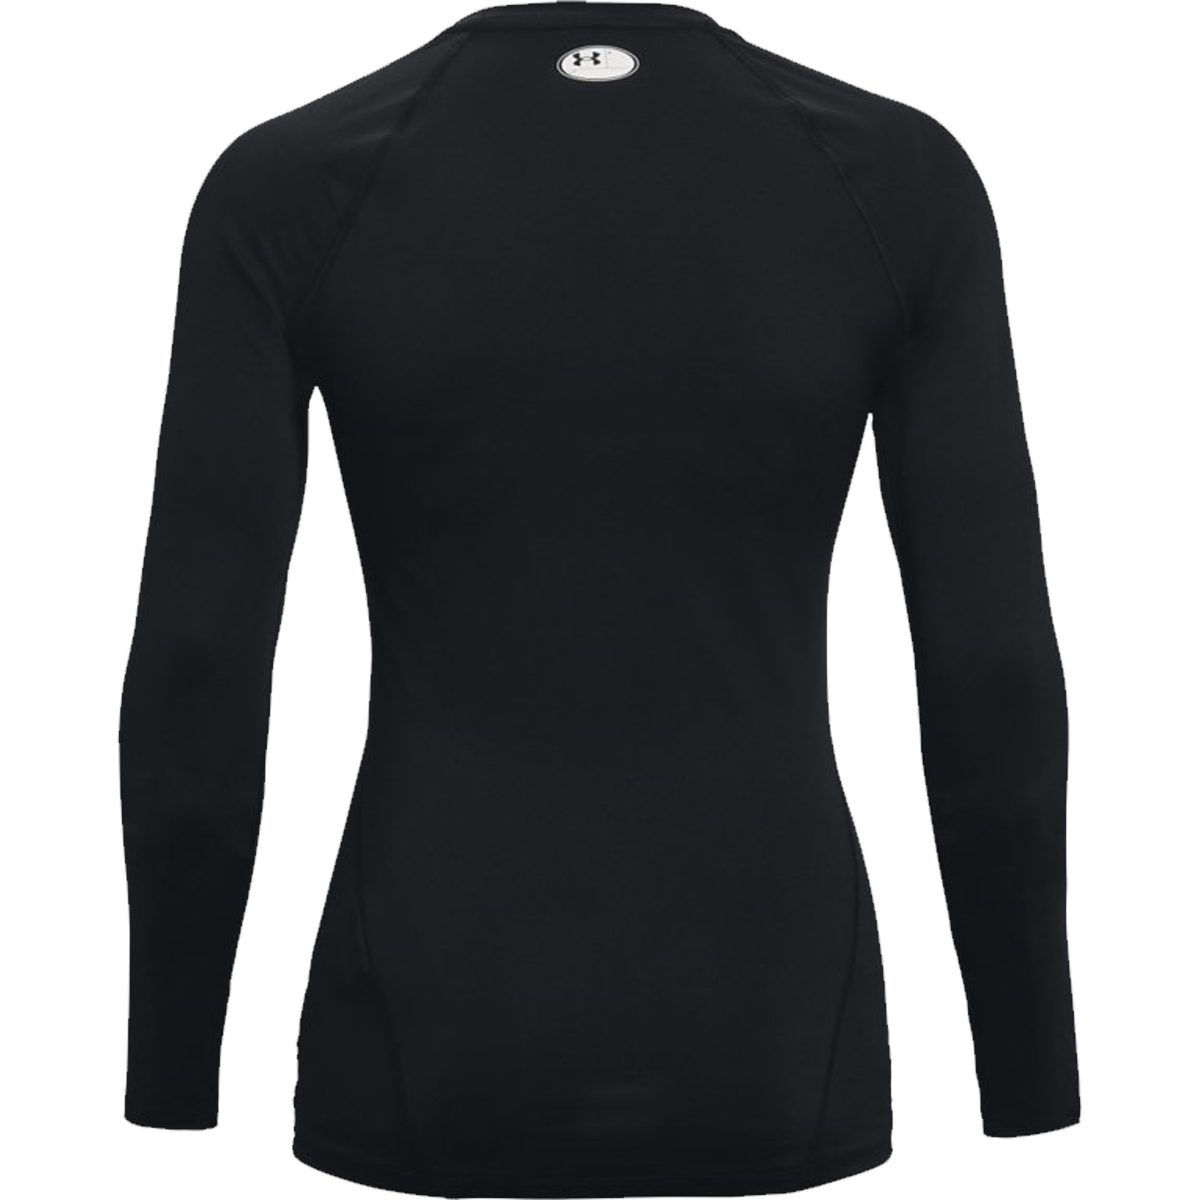 Women Petite's Zipper Long Sleeve Compression Shirts with